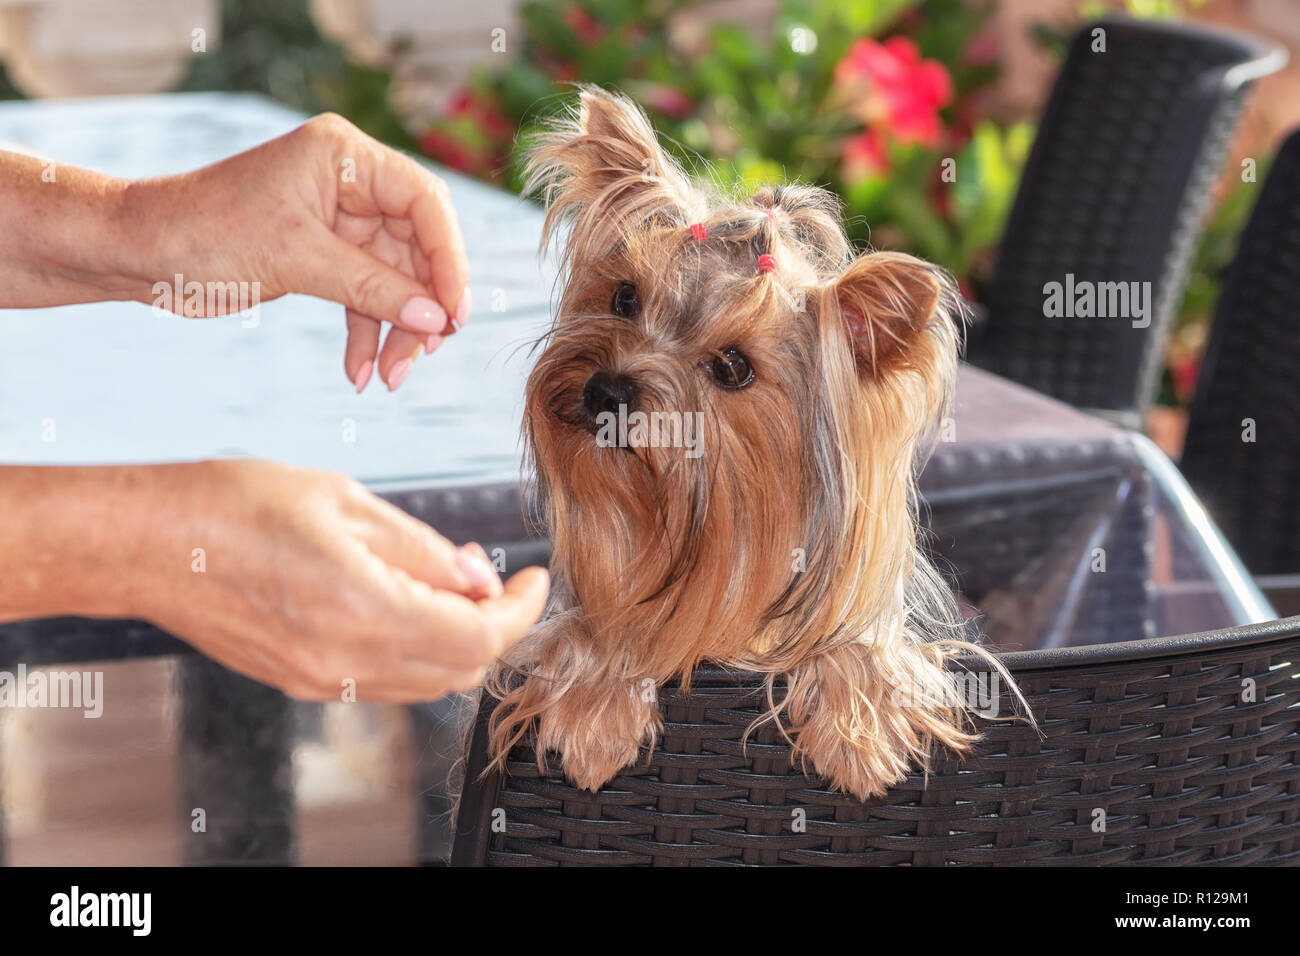 Yorkshire Terrier focussed on the dog's candy in hand Stock Photo